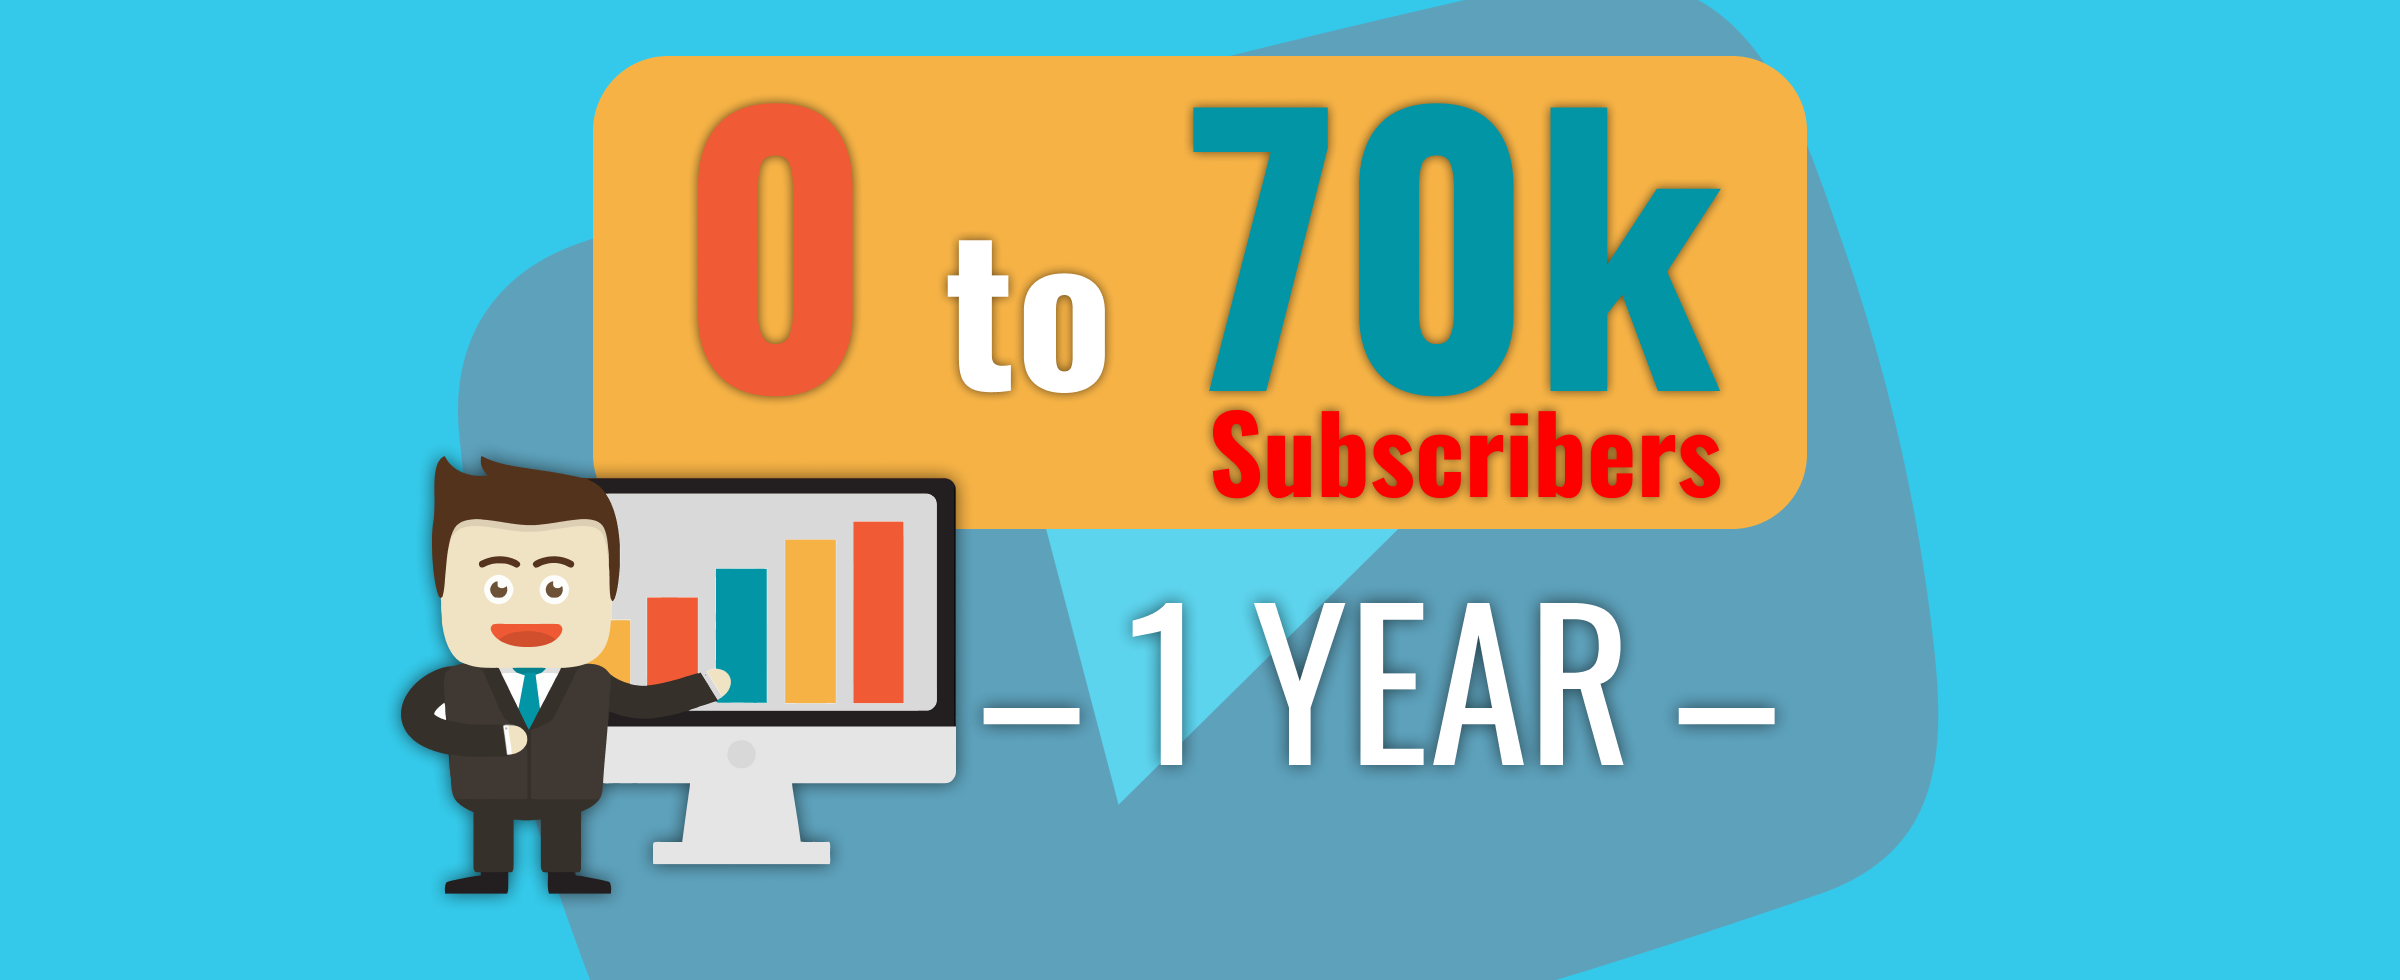 How I Went From 0 To 70k Subscribers On Youtube In 1 Year And How Much